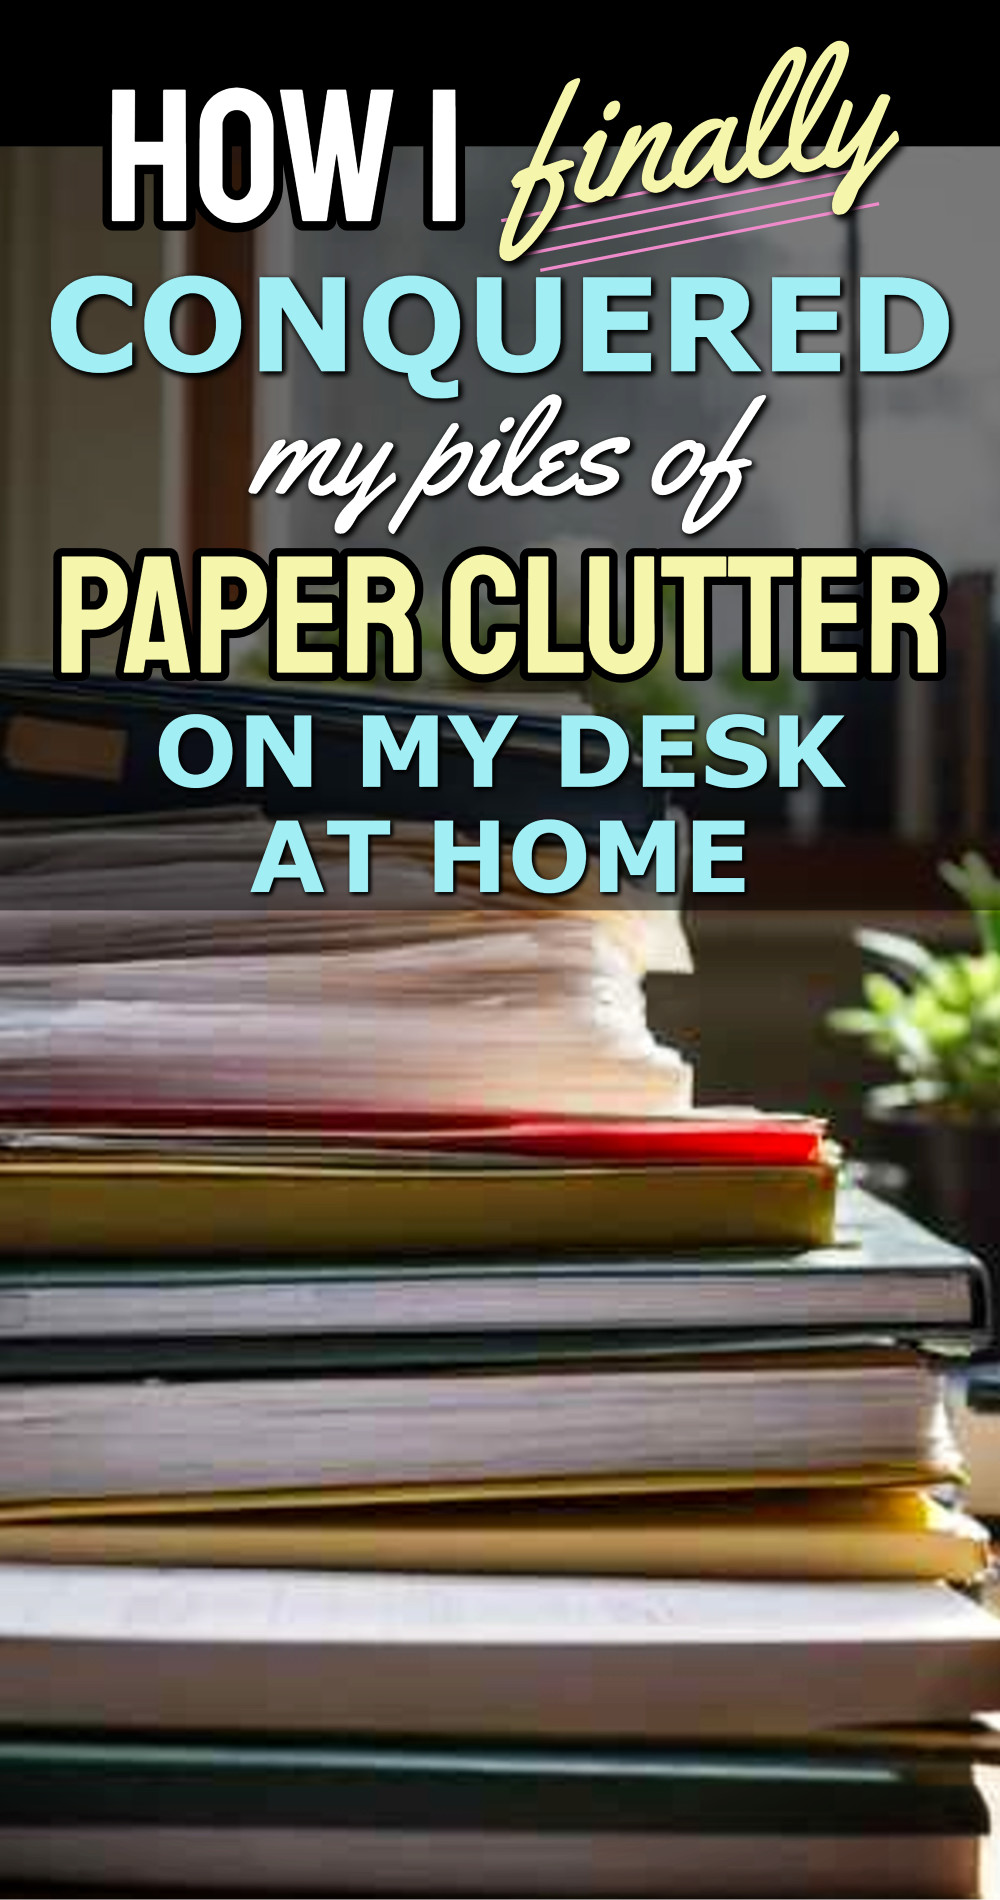 how i conquered paper clutter in my desk at home